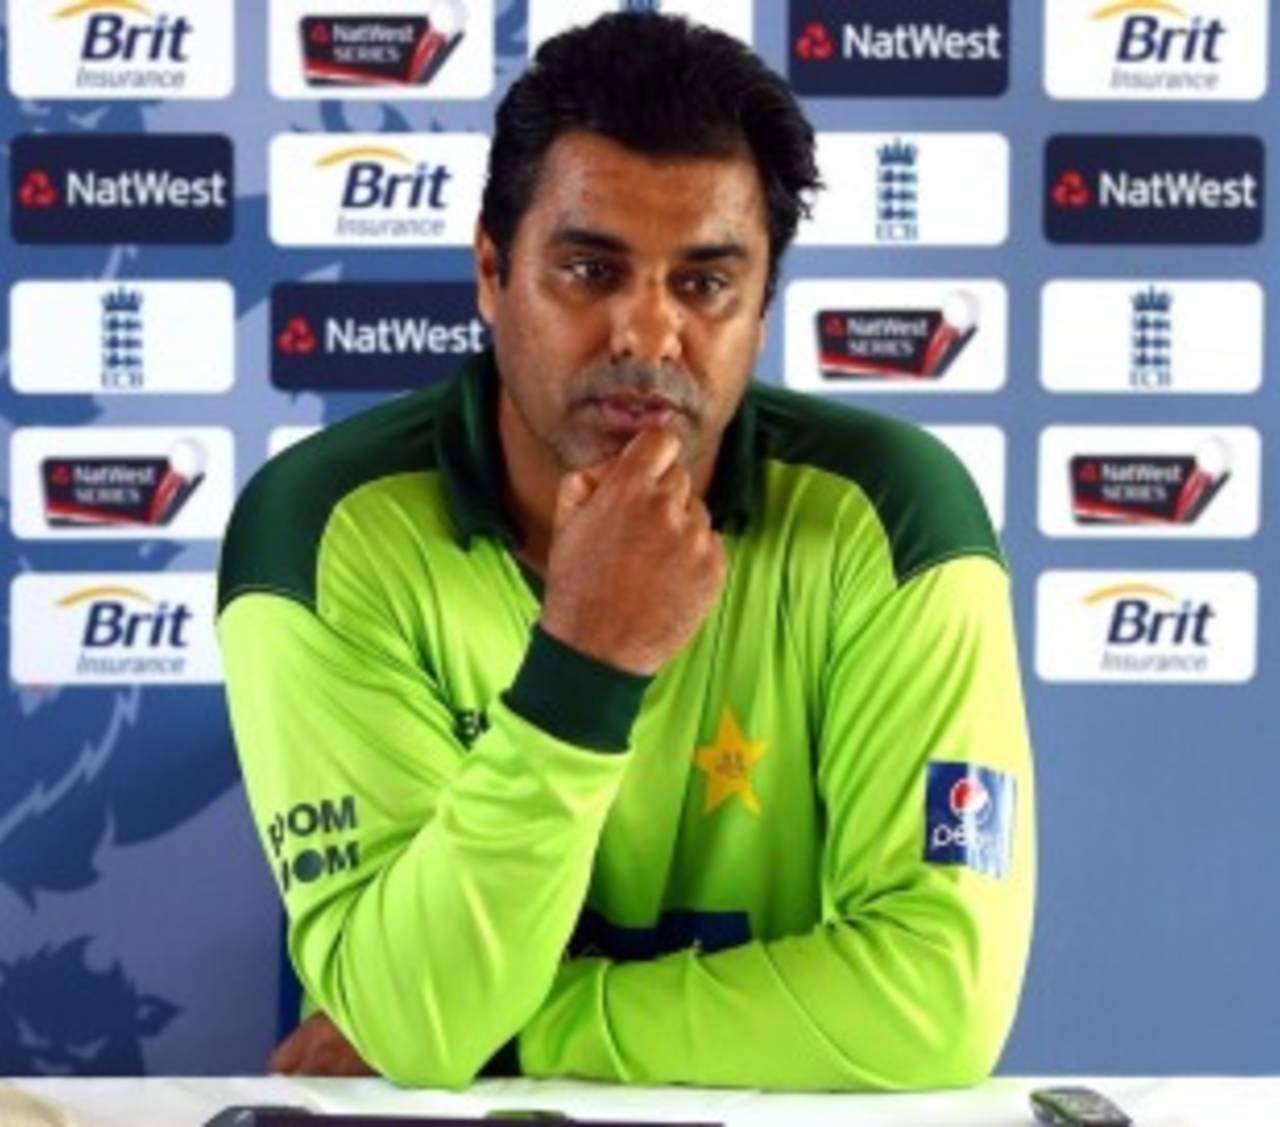 Pakistan coach Waqar Younis speaks to reporters at Chester-le-Street, September 9 2010 